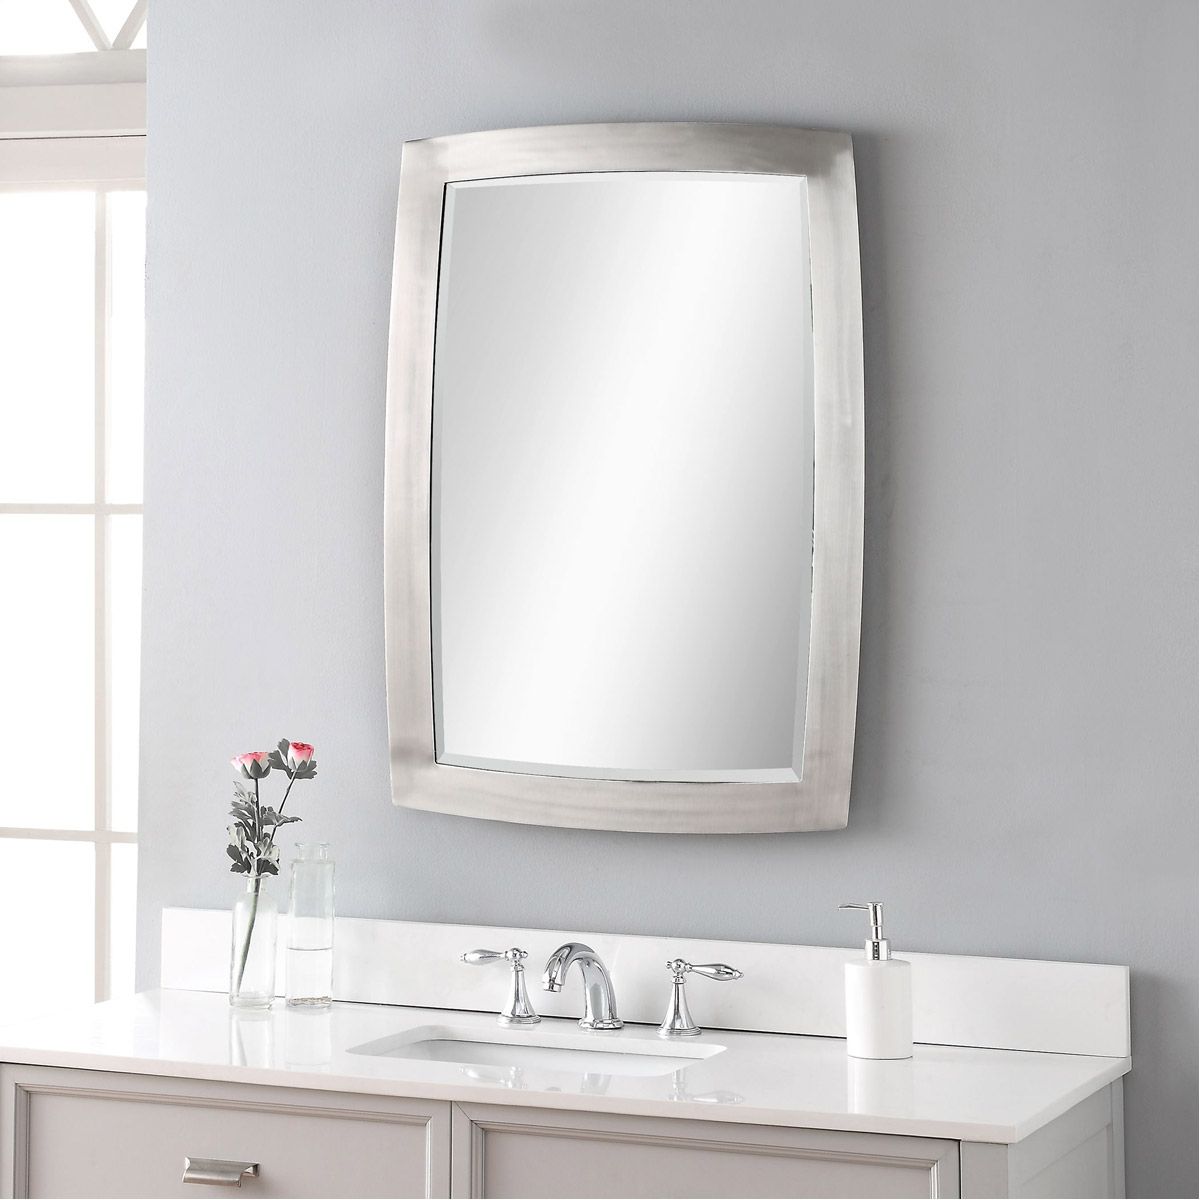 Uttermost 09618 Haskill 34 X 24 Inch Brushed Nickel Wall Mirror | Ebay Pertaining To Drake Brushed Steel Wall Mirrors (View 9 of 15)